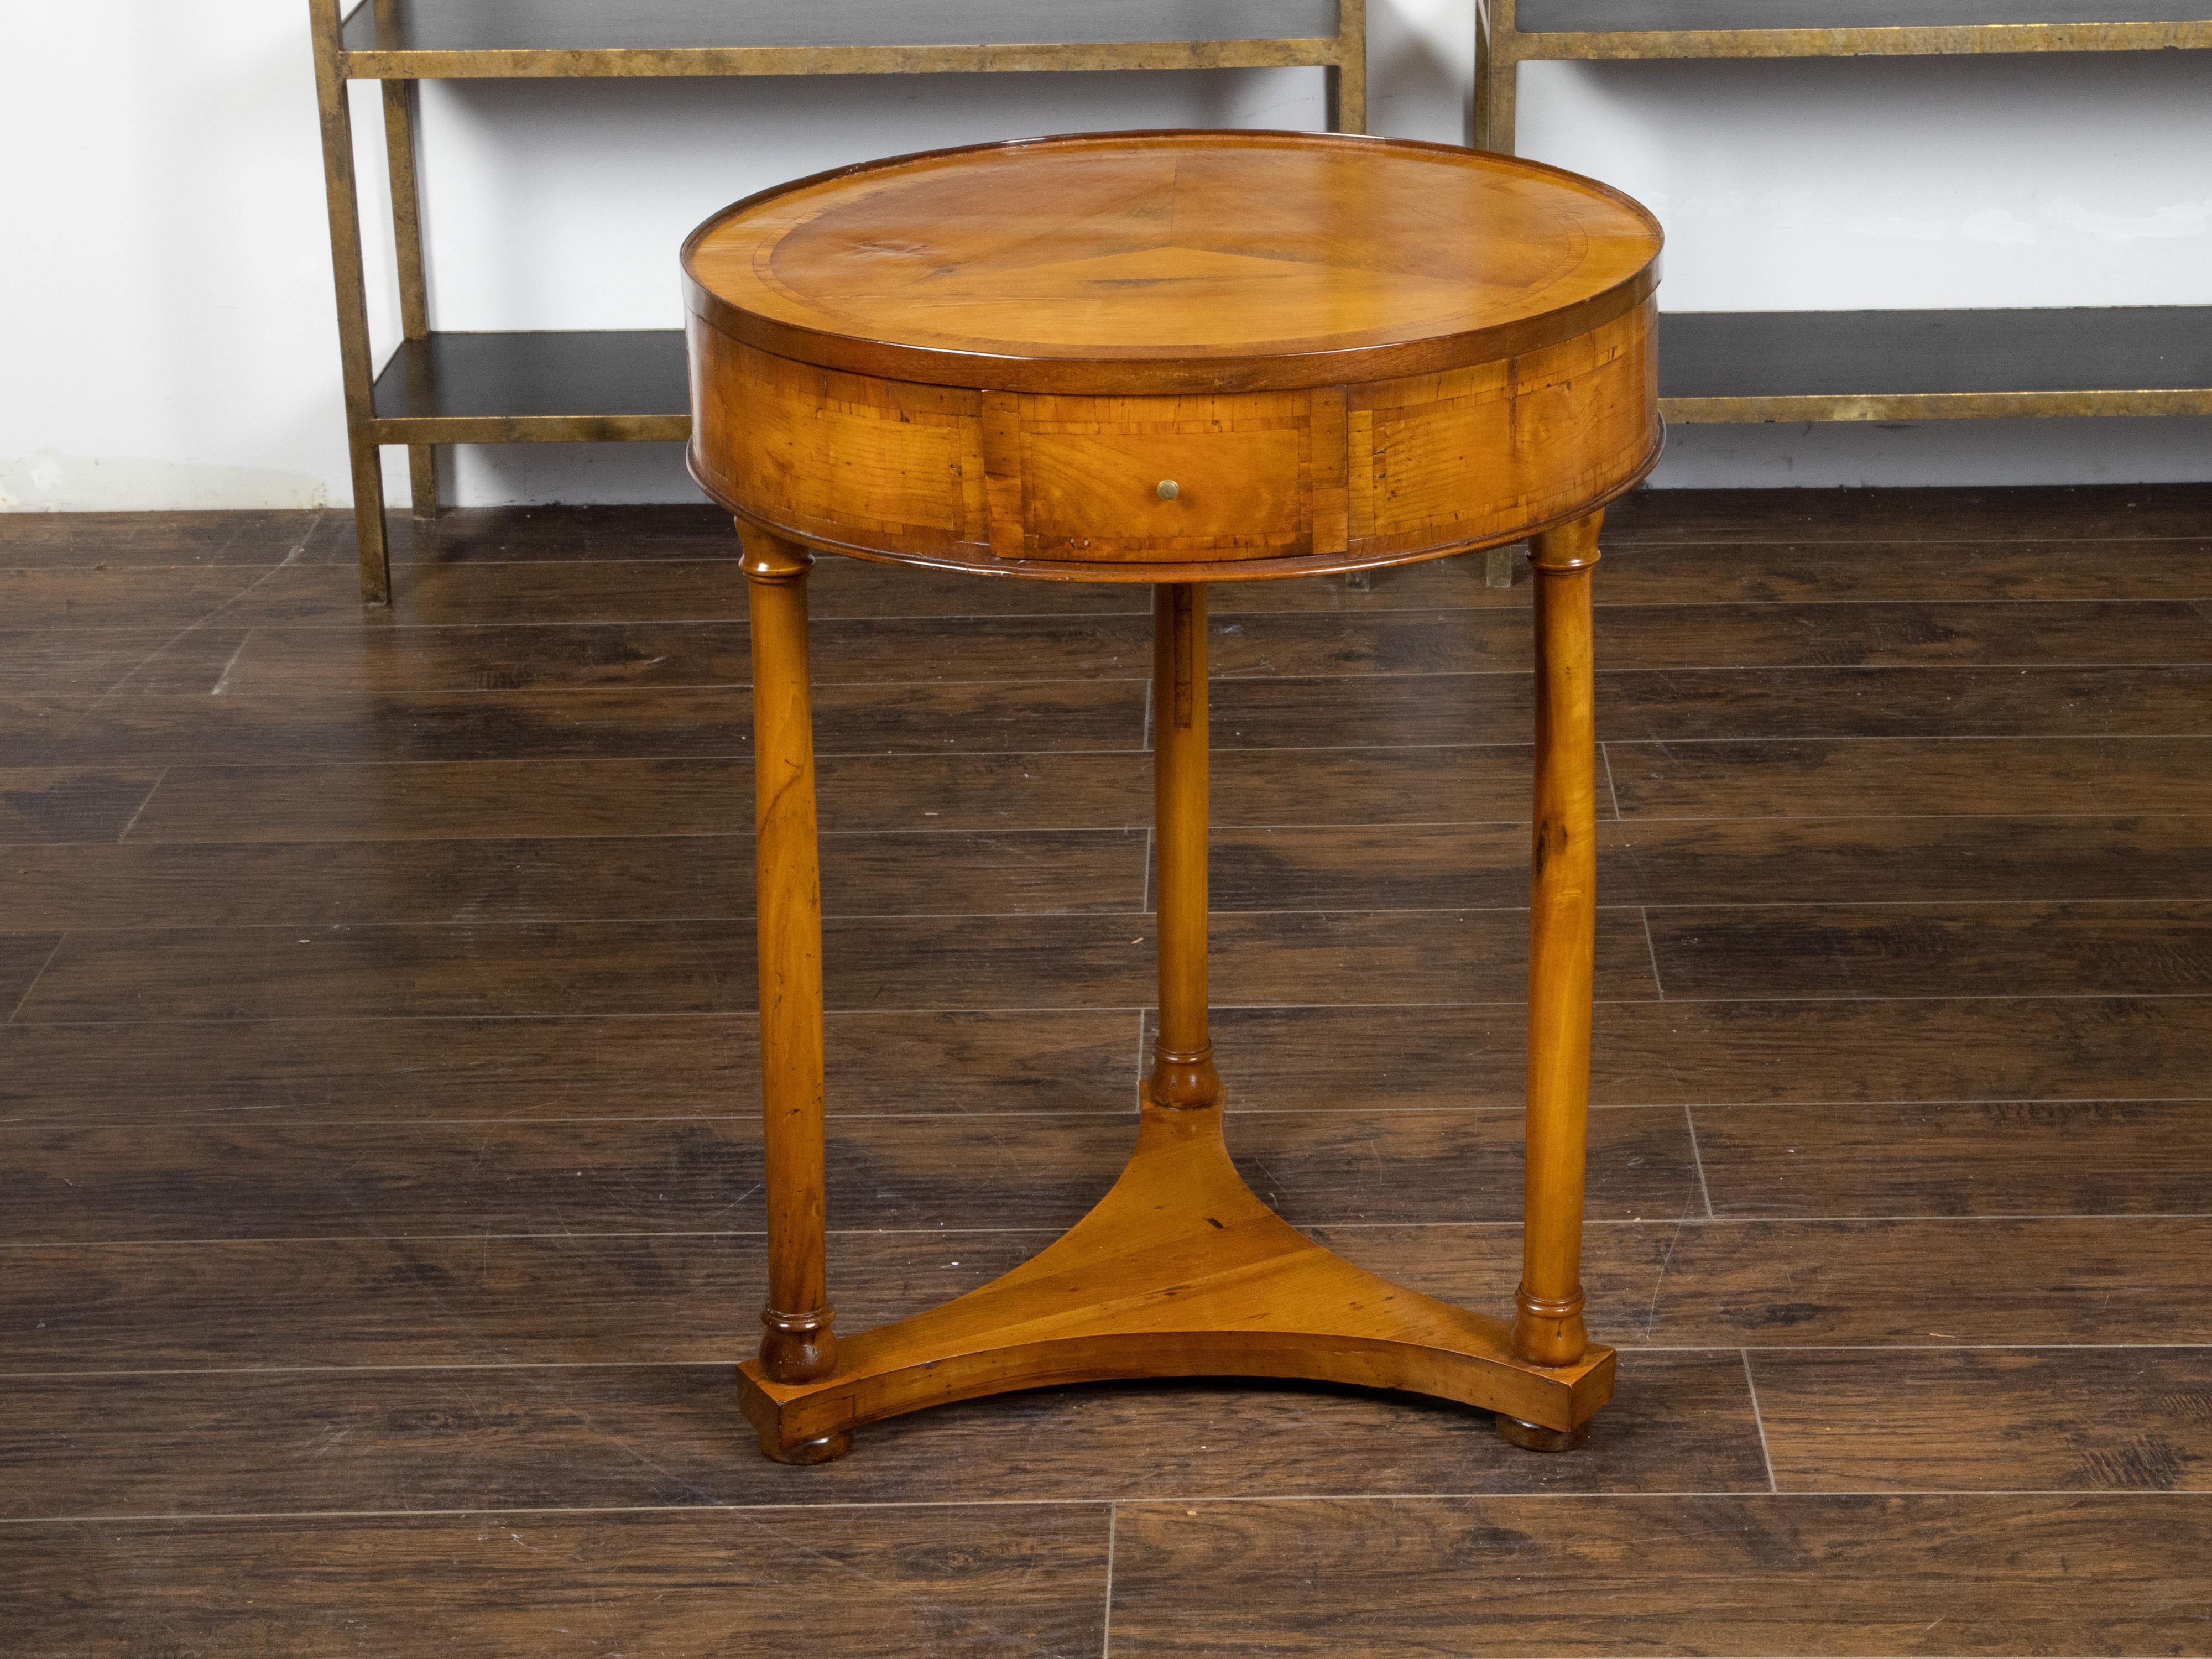 Austrian Biedermeier Period 1840s Table with Round Top, Three Drawers and Column Legs For Sale